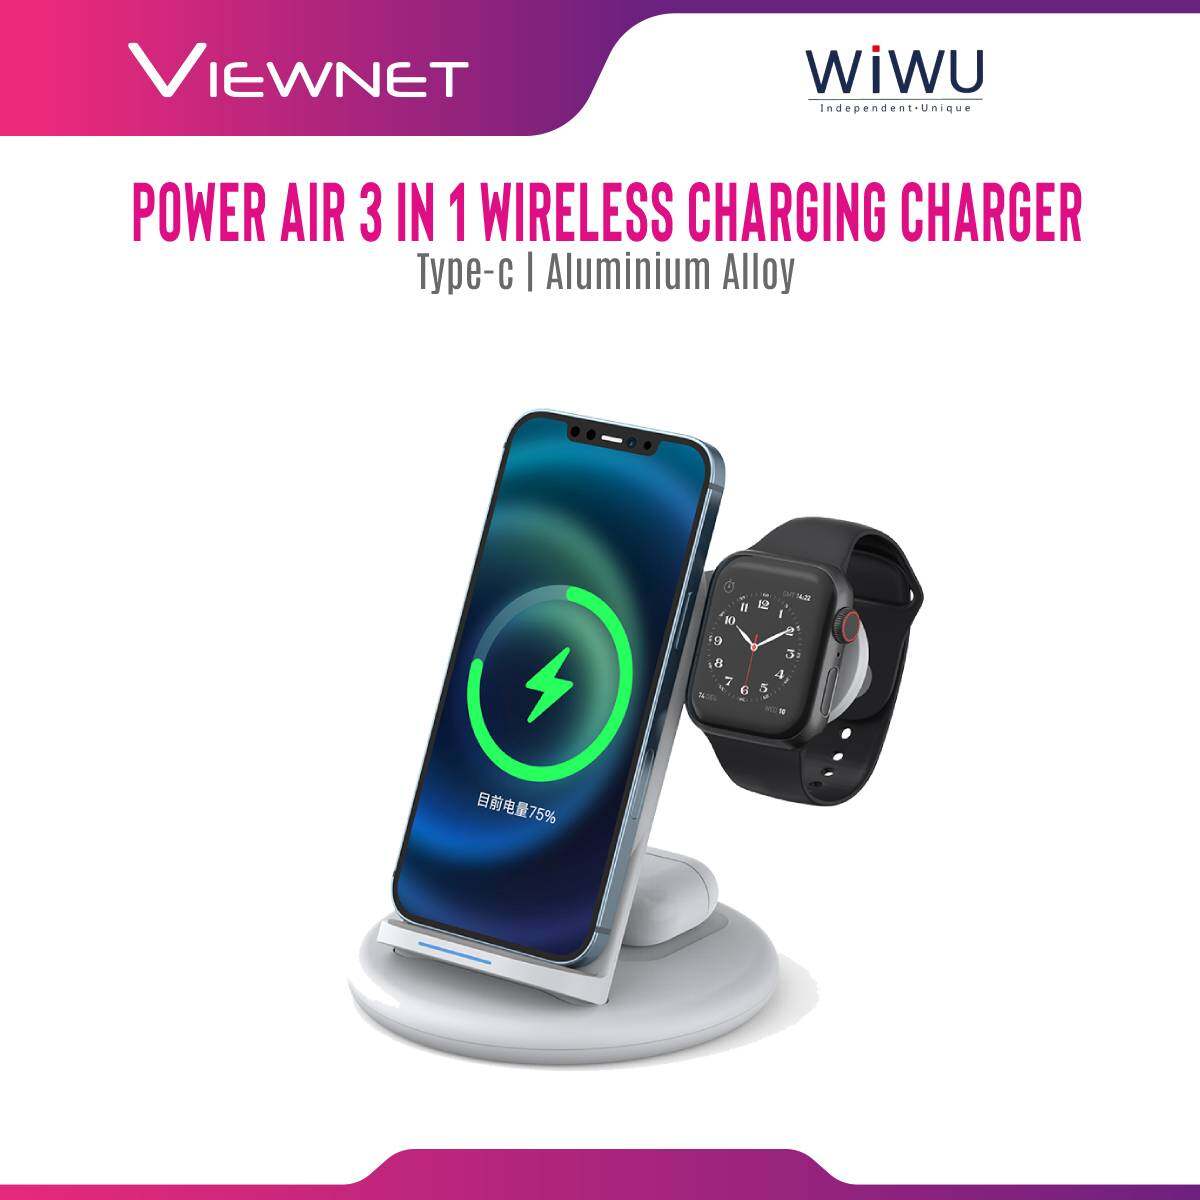 Wiwu Power Air 3 In 1 Wireless Charging Charger